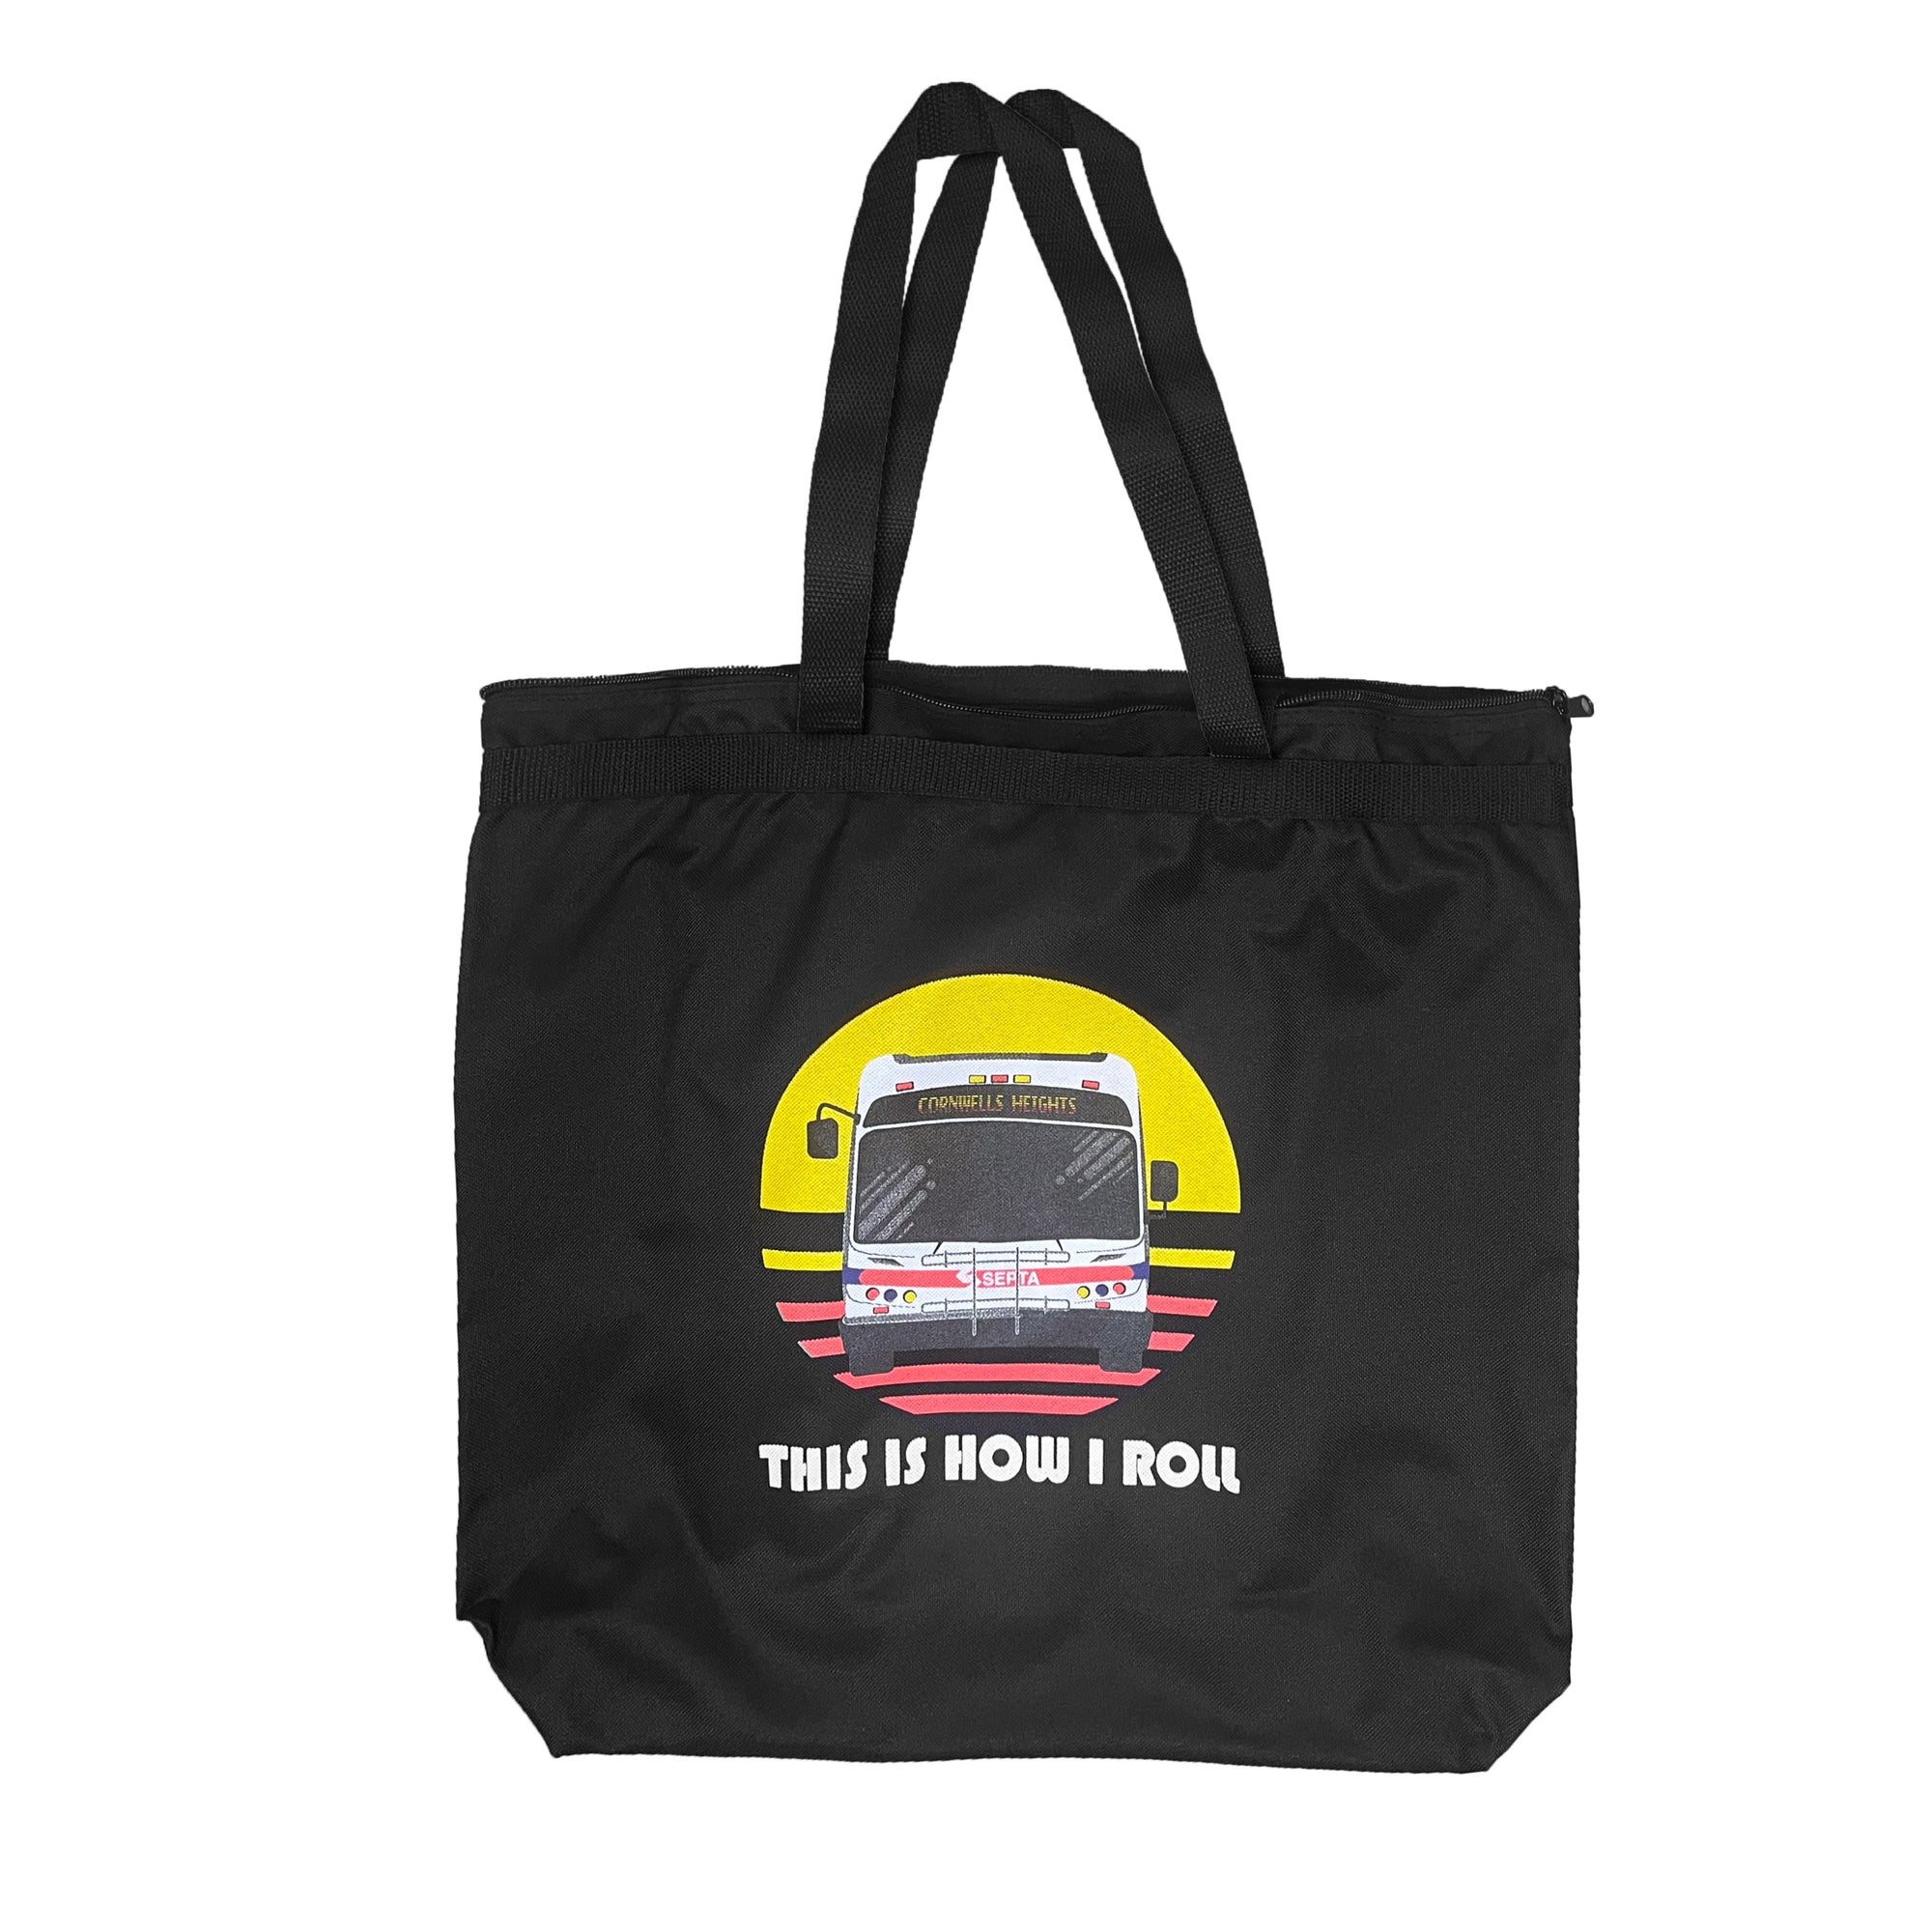 How I Roll Tote